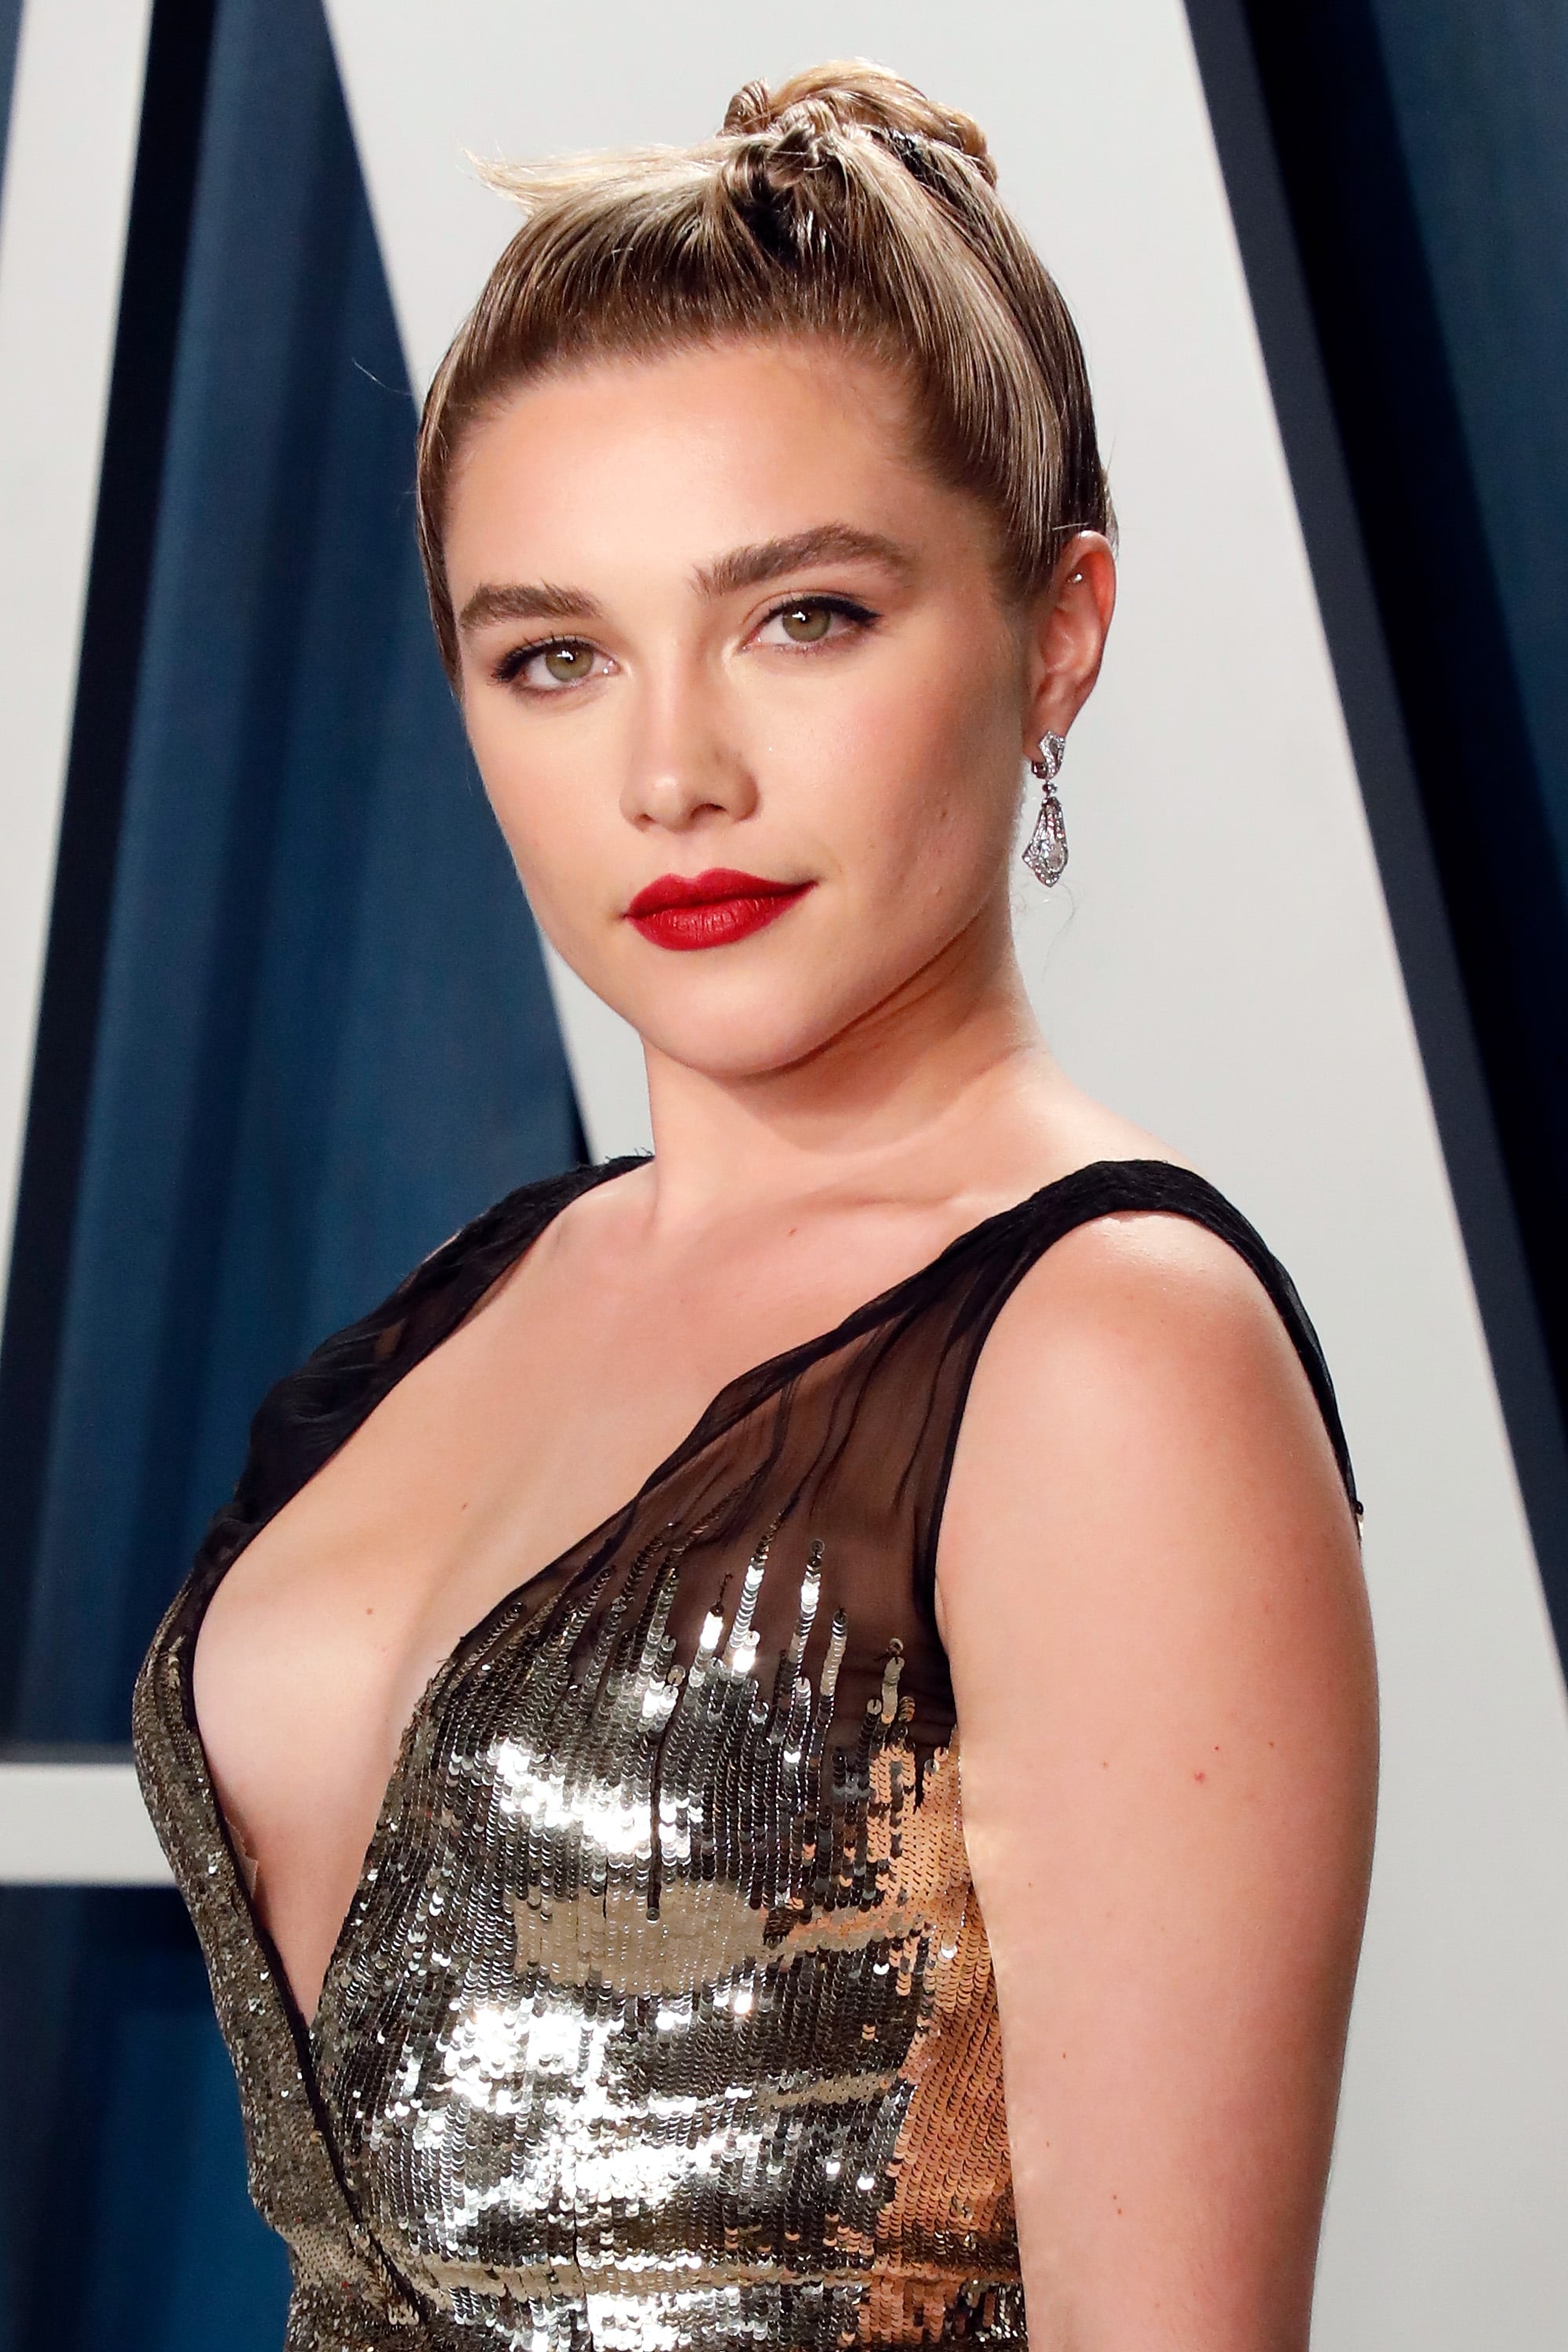 Florence Pugh's Gold Dress at the Oscars Afterparty 2020